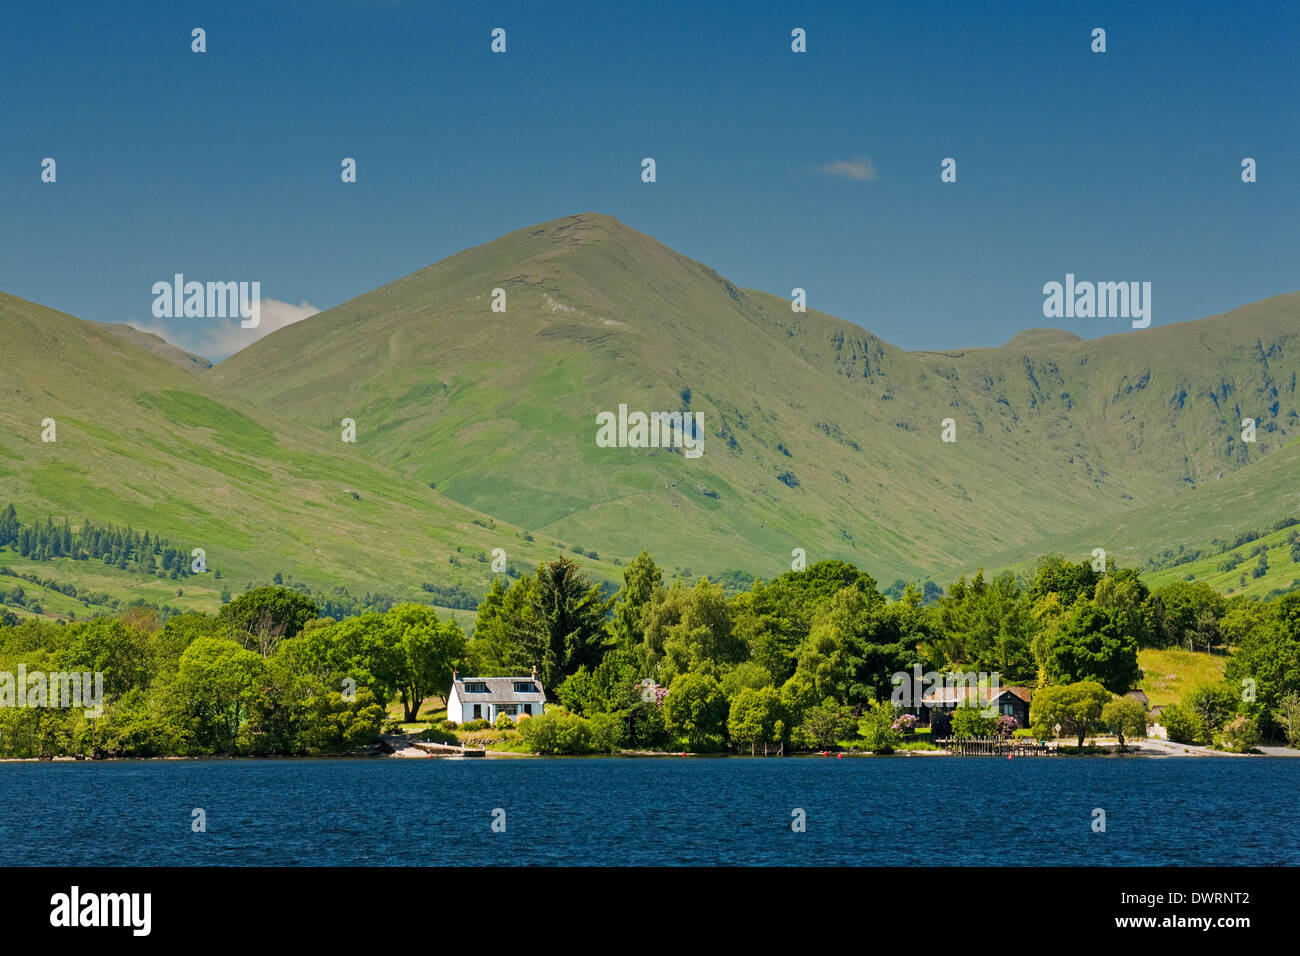 The island of Inchfad in Loch Lomond. The Luss Hills are in the background. Stock Photo